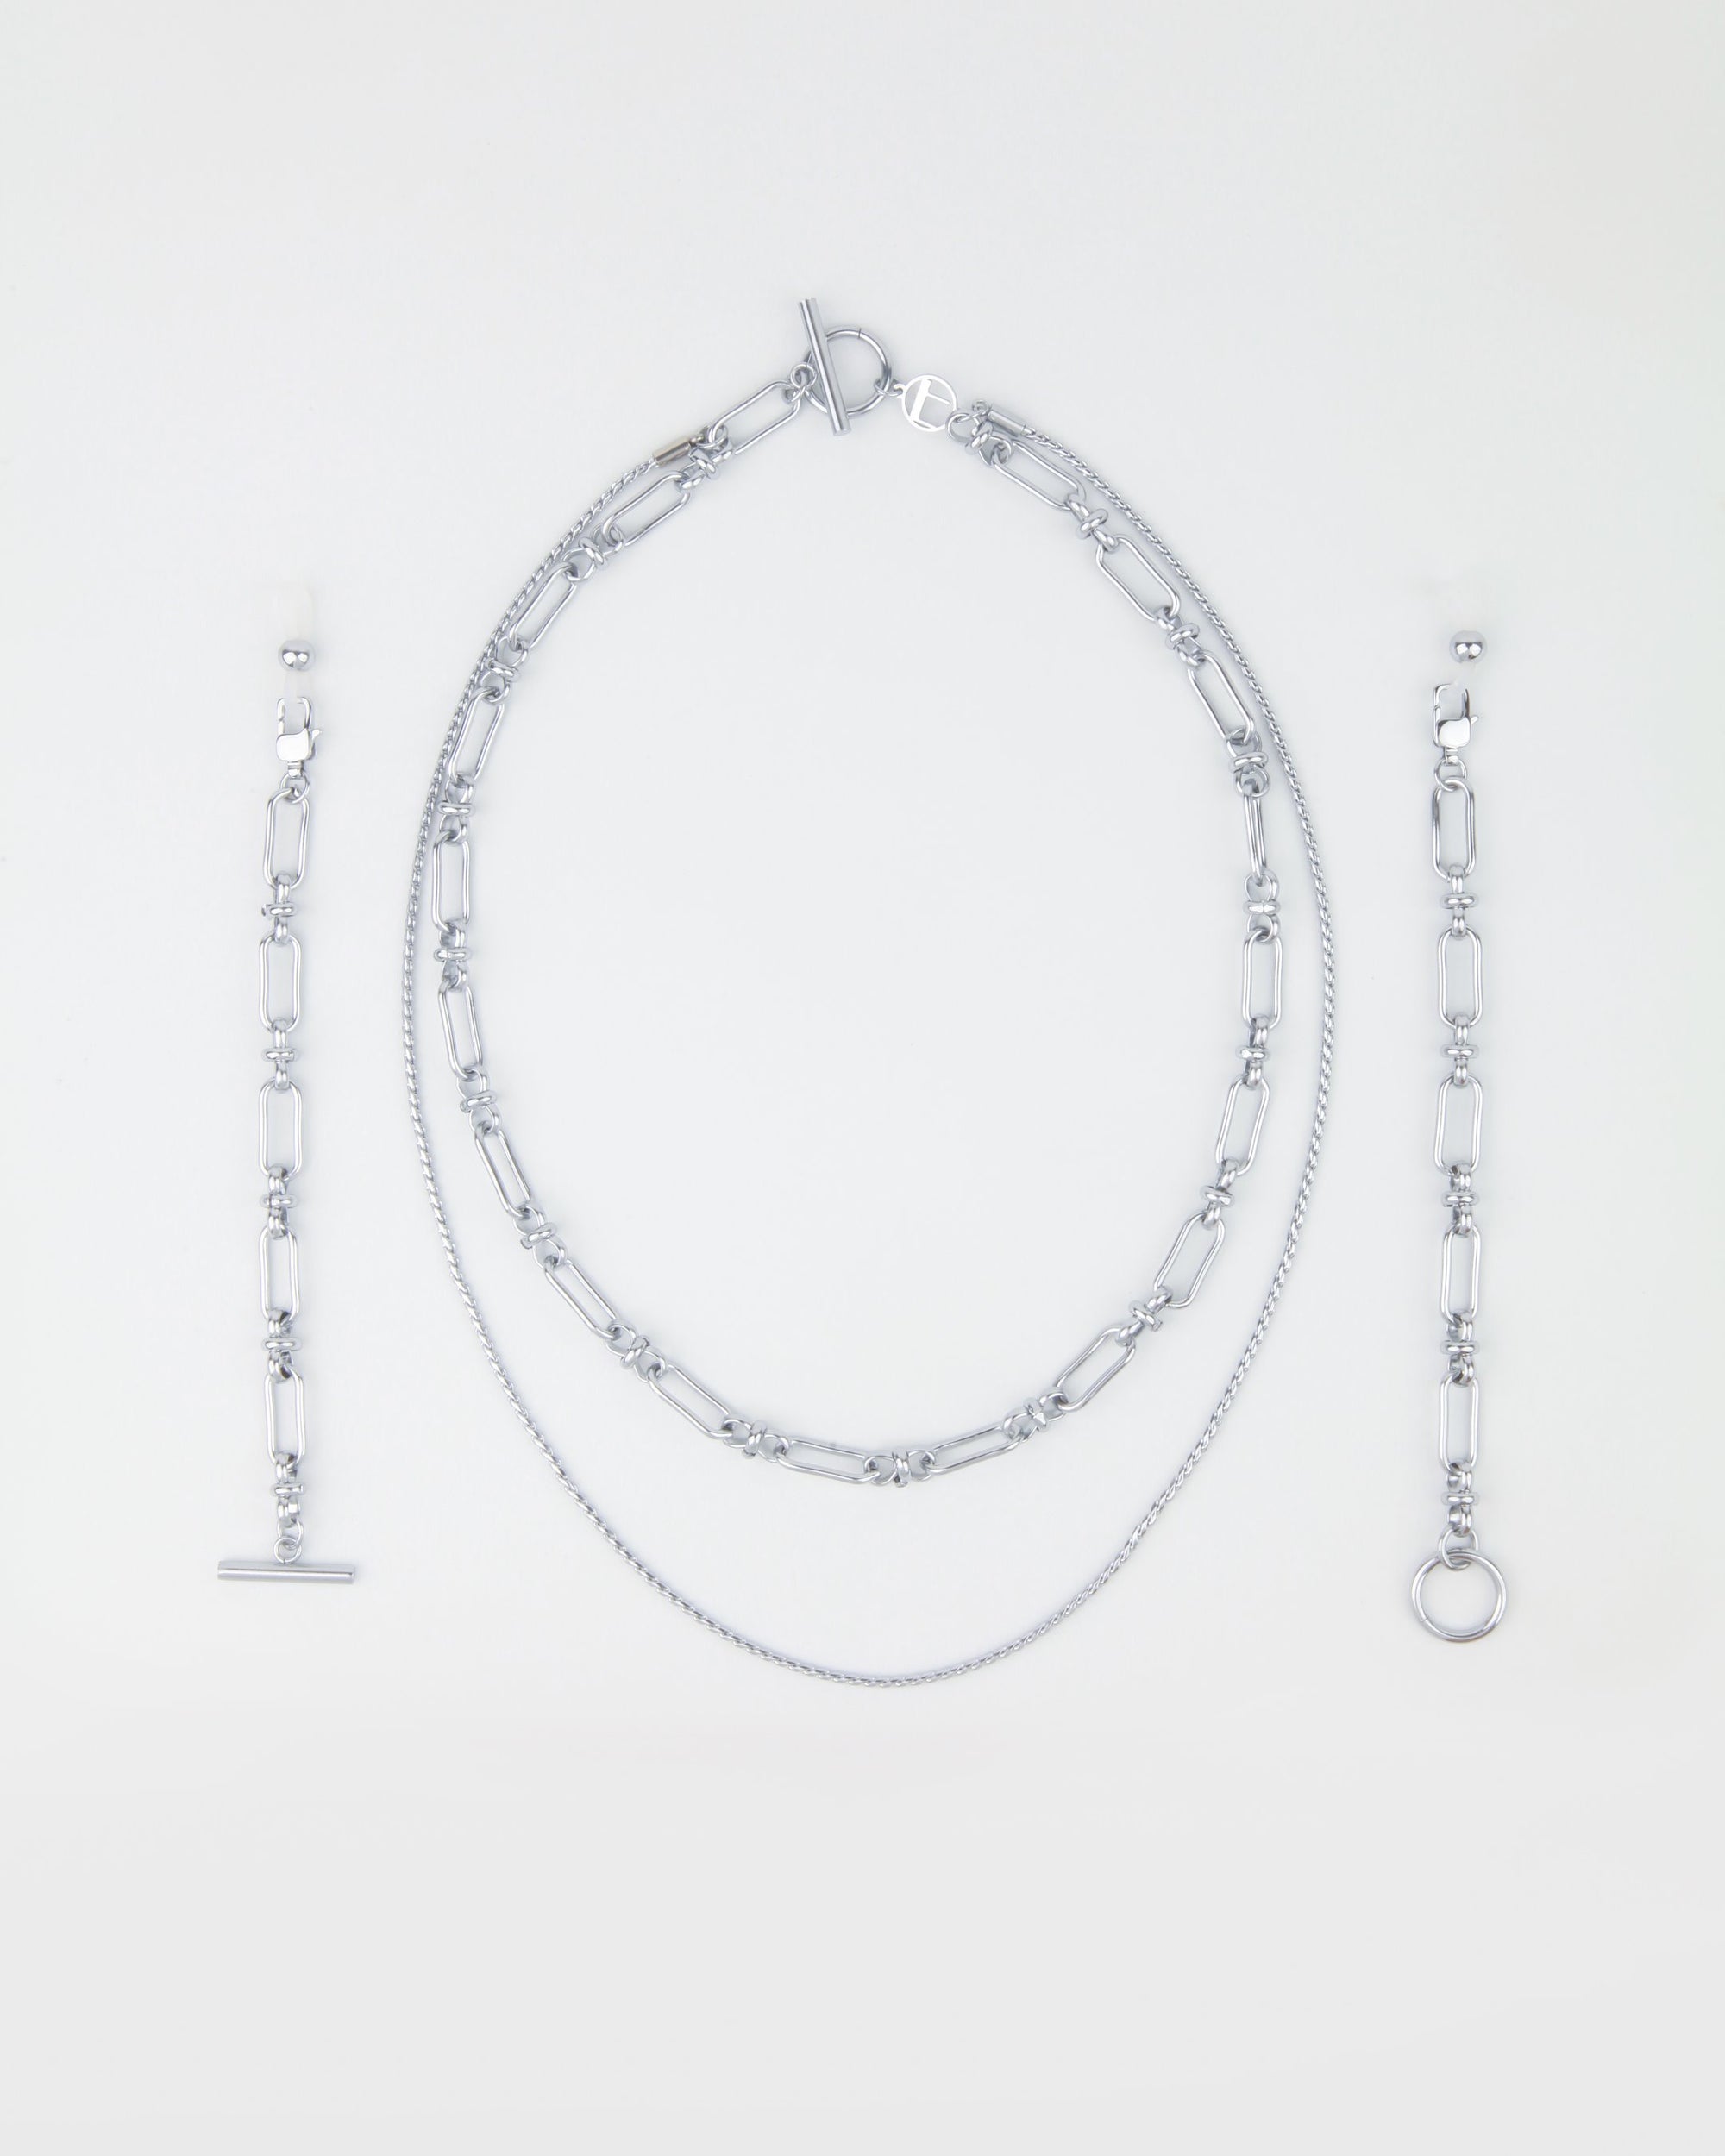 A Vienna Glasses Chain by For Art&#39;s Sake®, featuring an oval link necklace with a toggle clasp, a shorter fine chain necklace, a bracelet with a toggle clasp, and a bracelet with a ring clasp—all arranged neatly on a light background. The collection&#39;s 18-karat gold-plating adds an elegant touch to each piece.